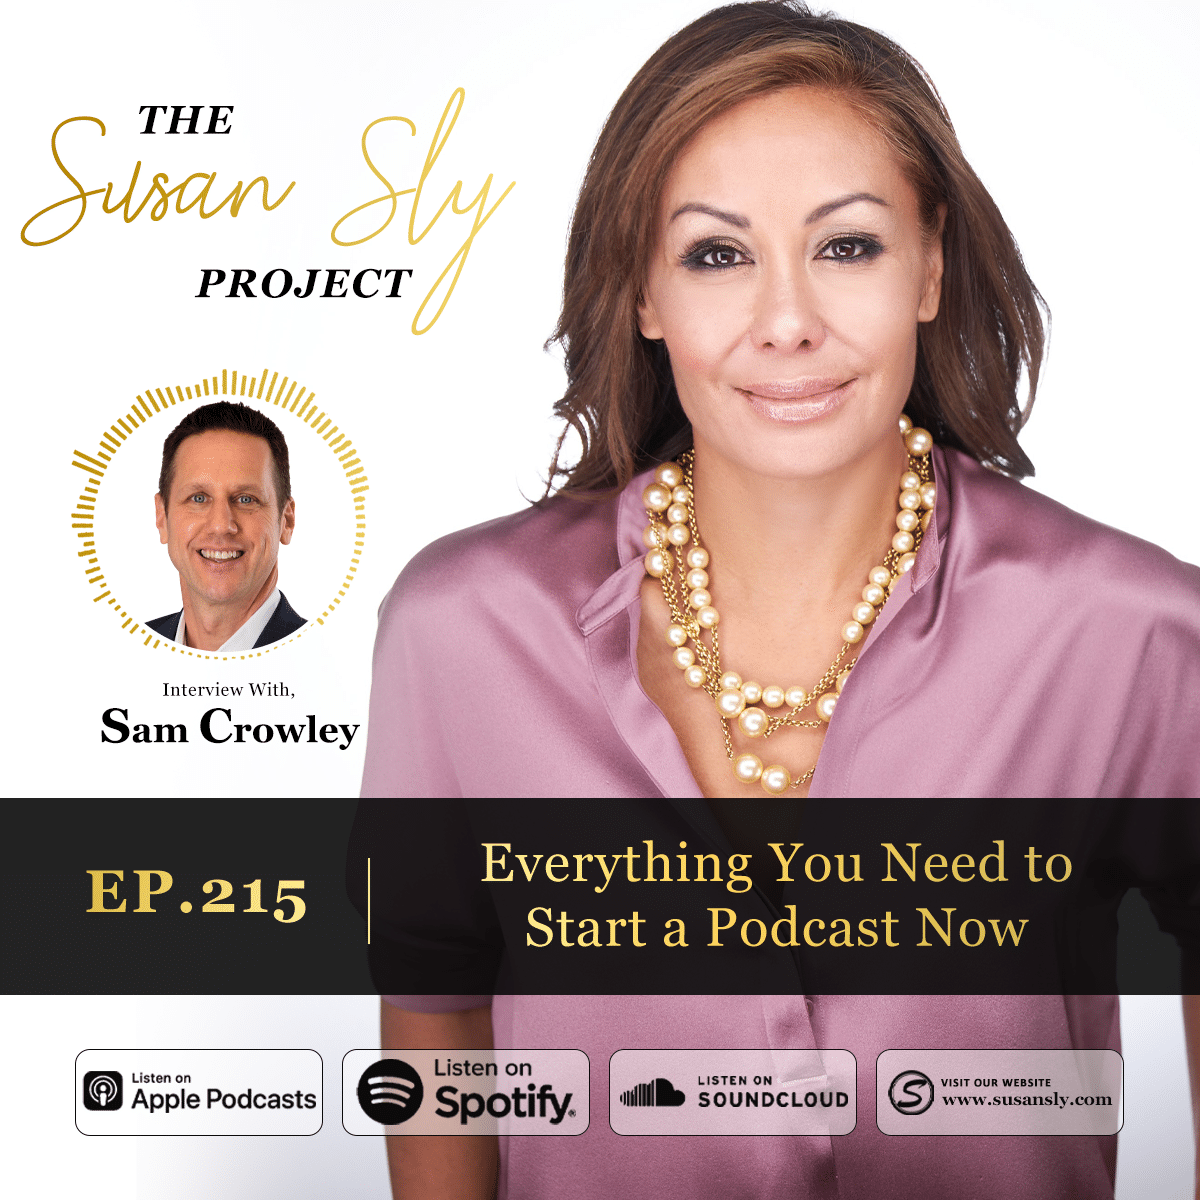 Susan Sly podcast interview with Sam Crowley